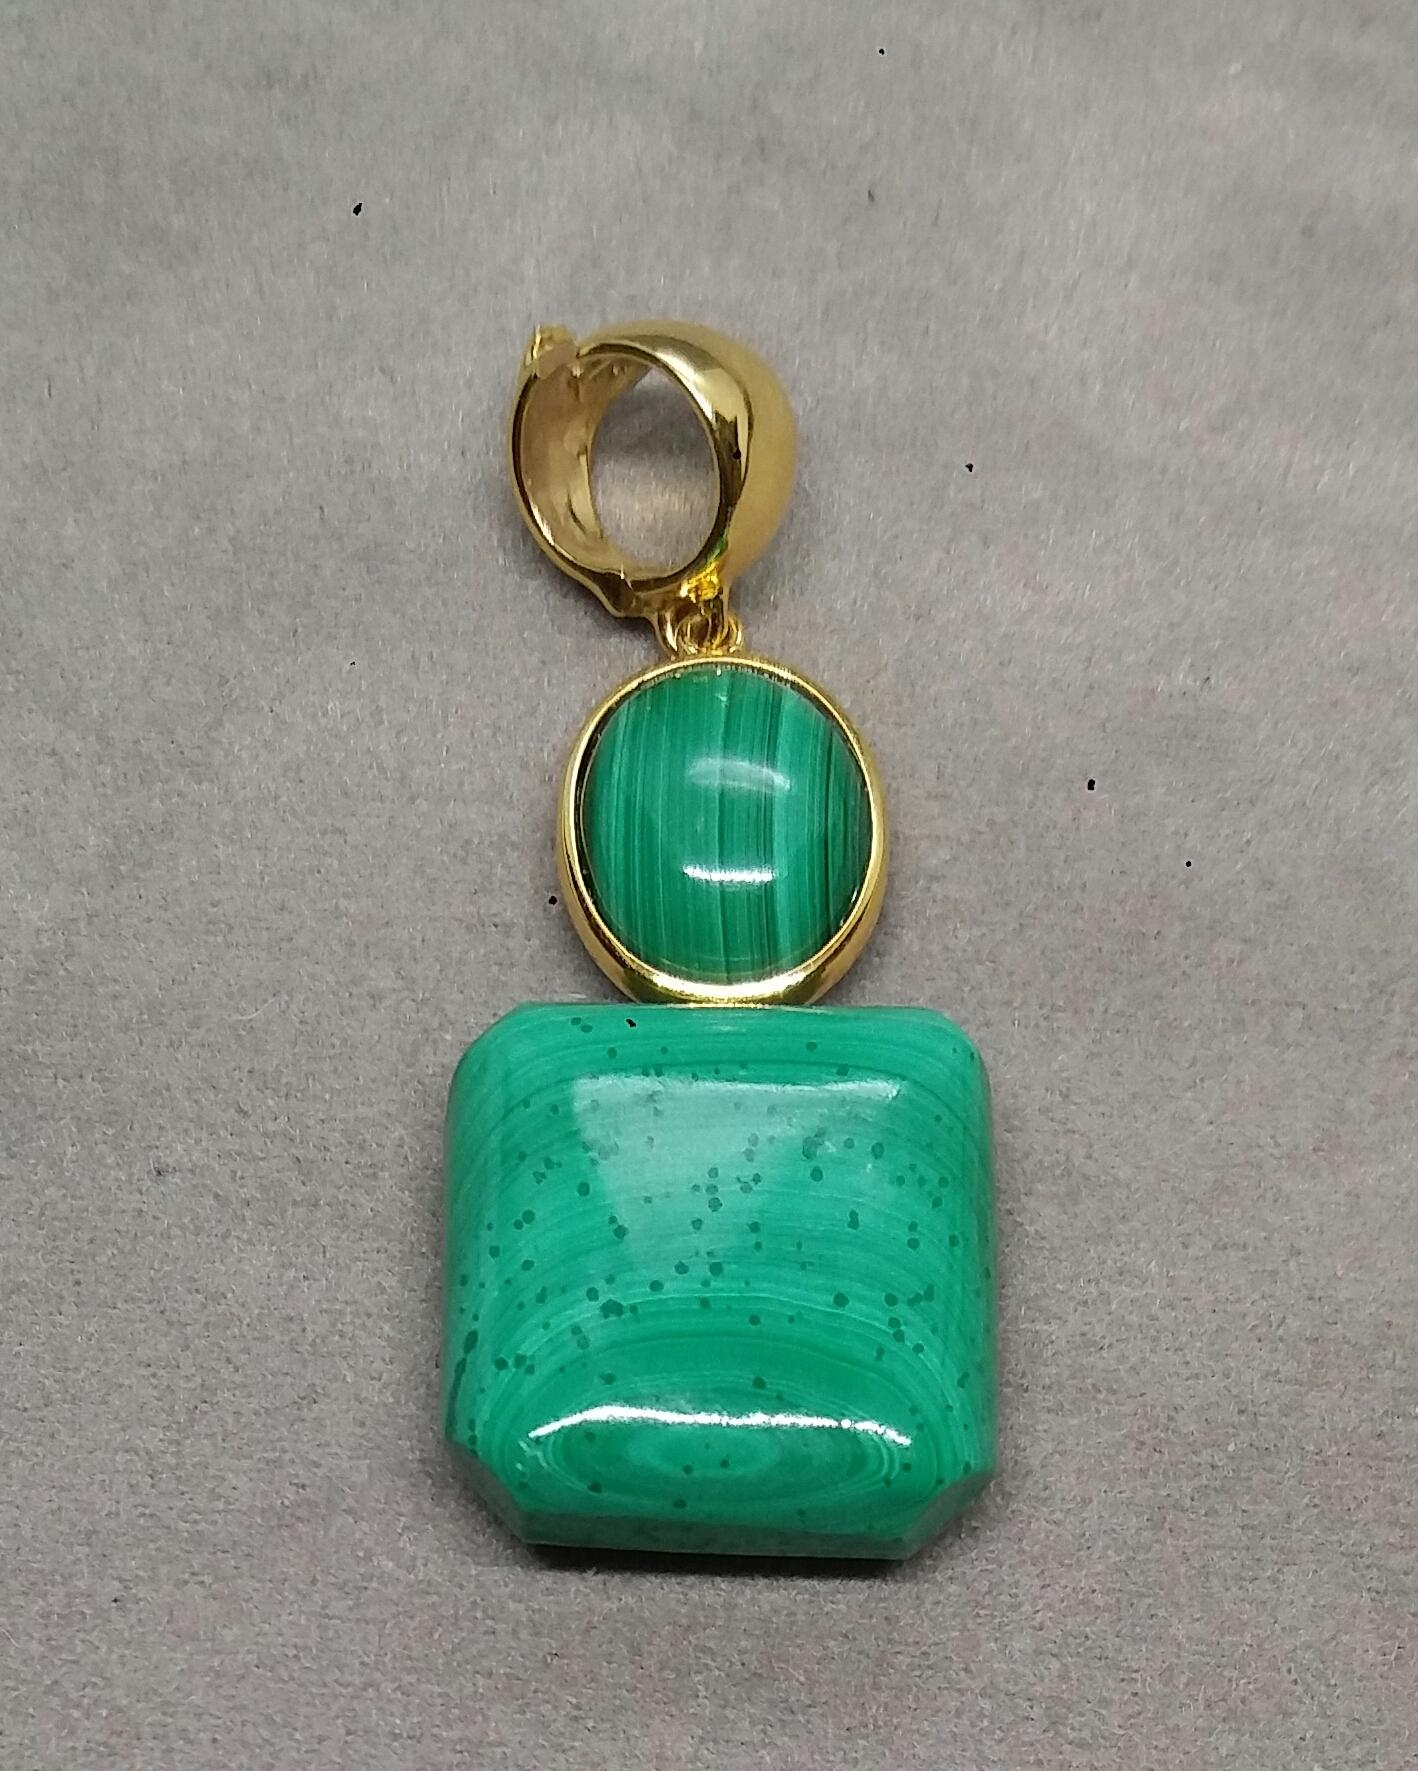 Excellent quality Malachite Octagon shape suspended from a oval Malachite cabochon set in 14k. yellow gold bezel...On top an handmade enhancer can be opened to attach it in a beads necklace to easily clip on and remove anytime.